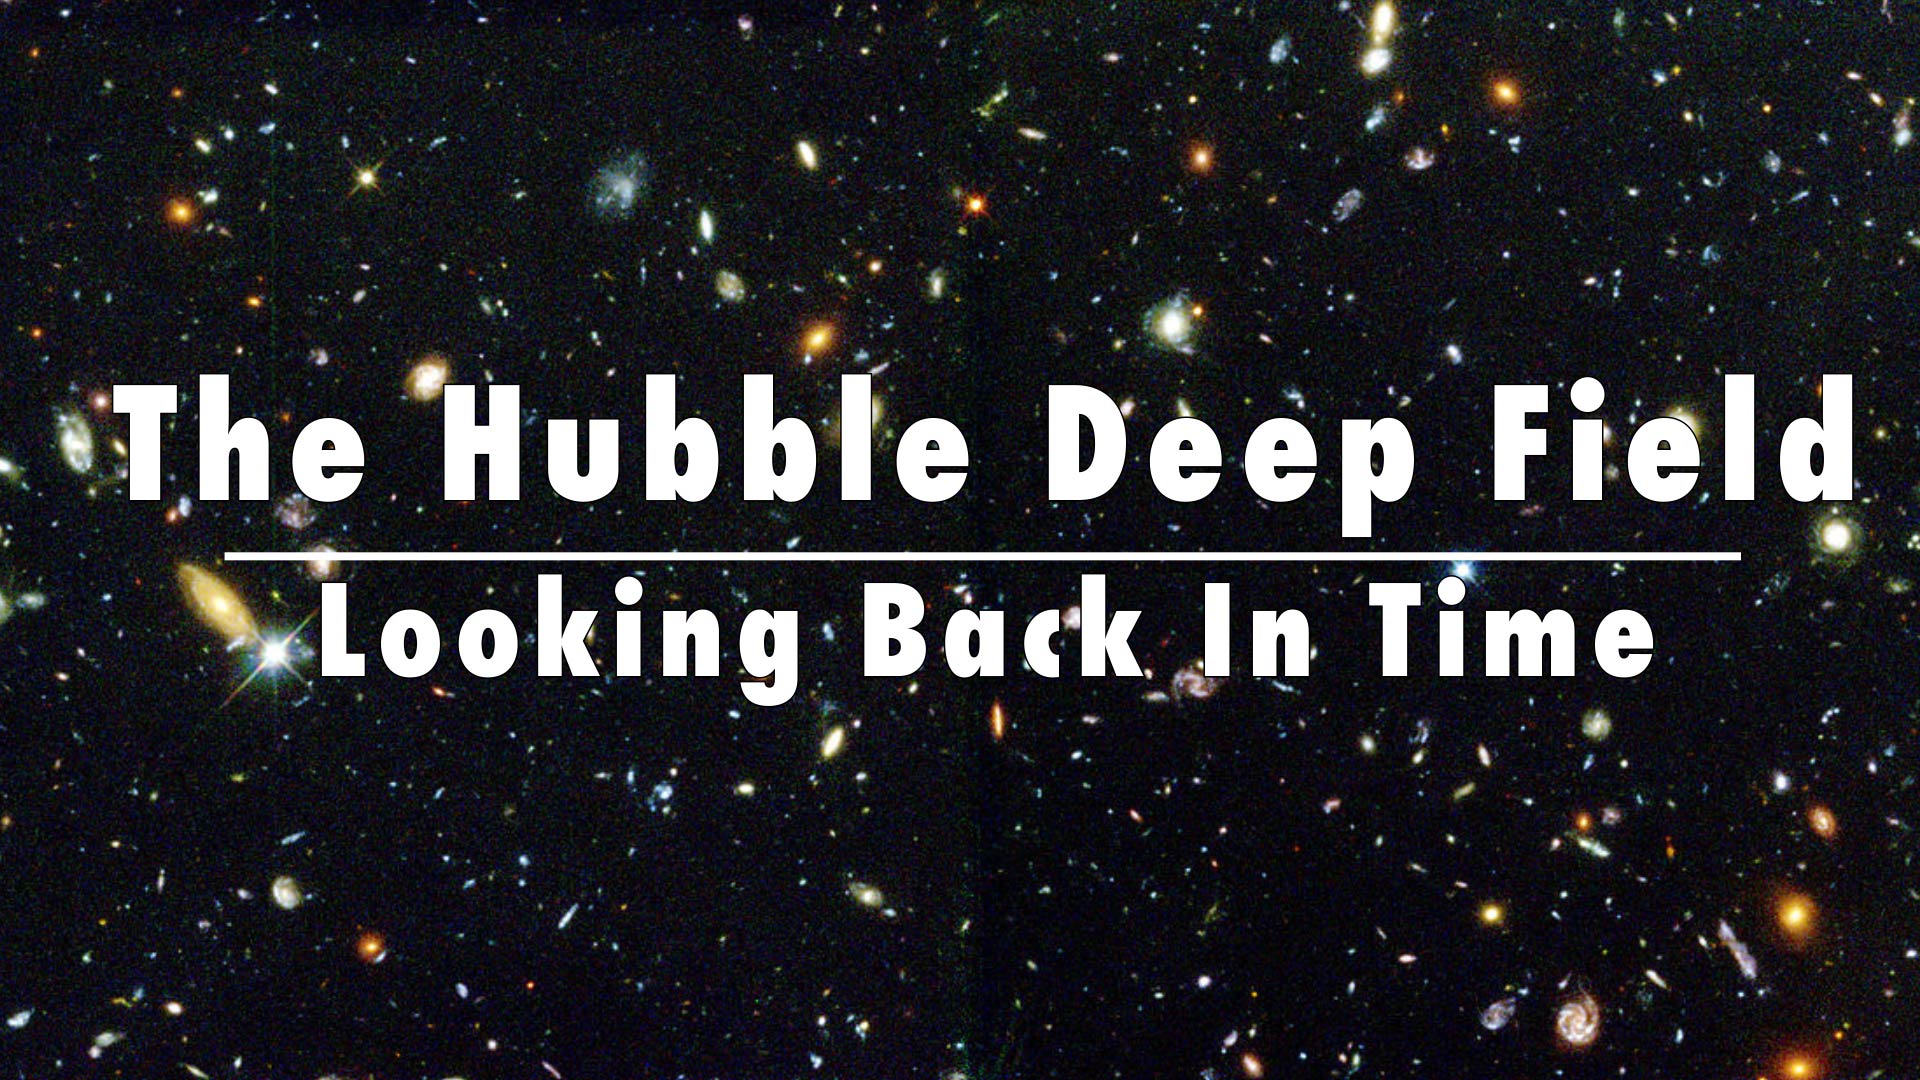 Preview Image for The Hubble Deep Field: Looking Back In Time